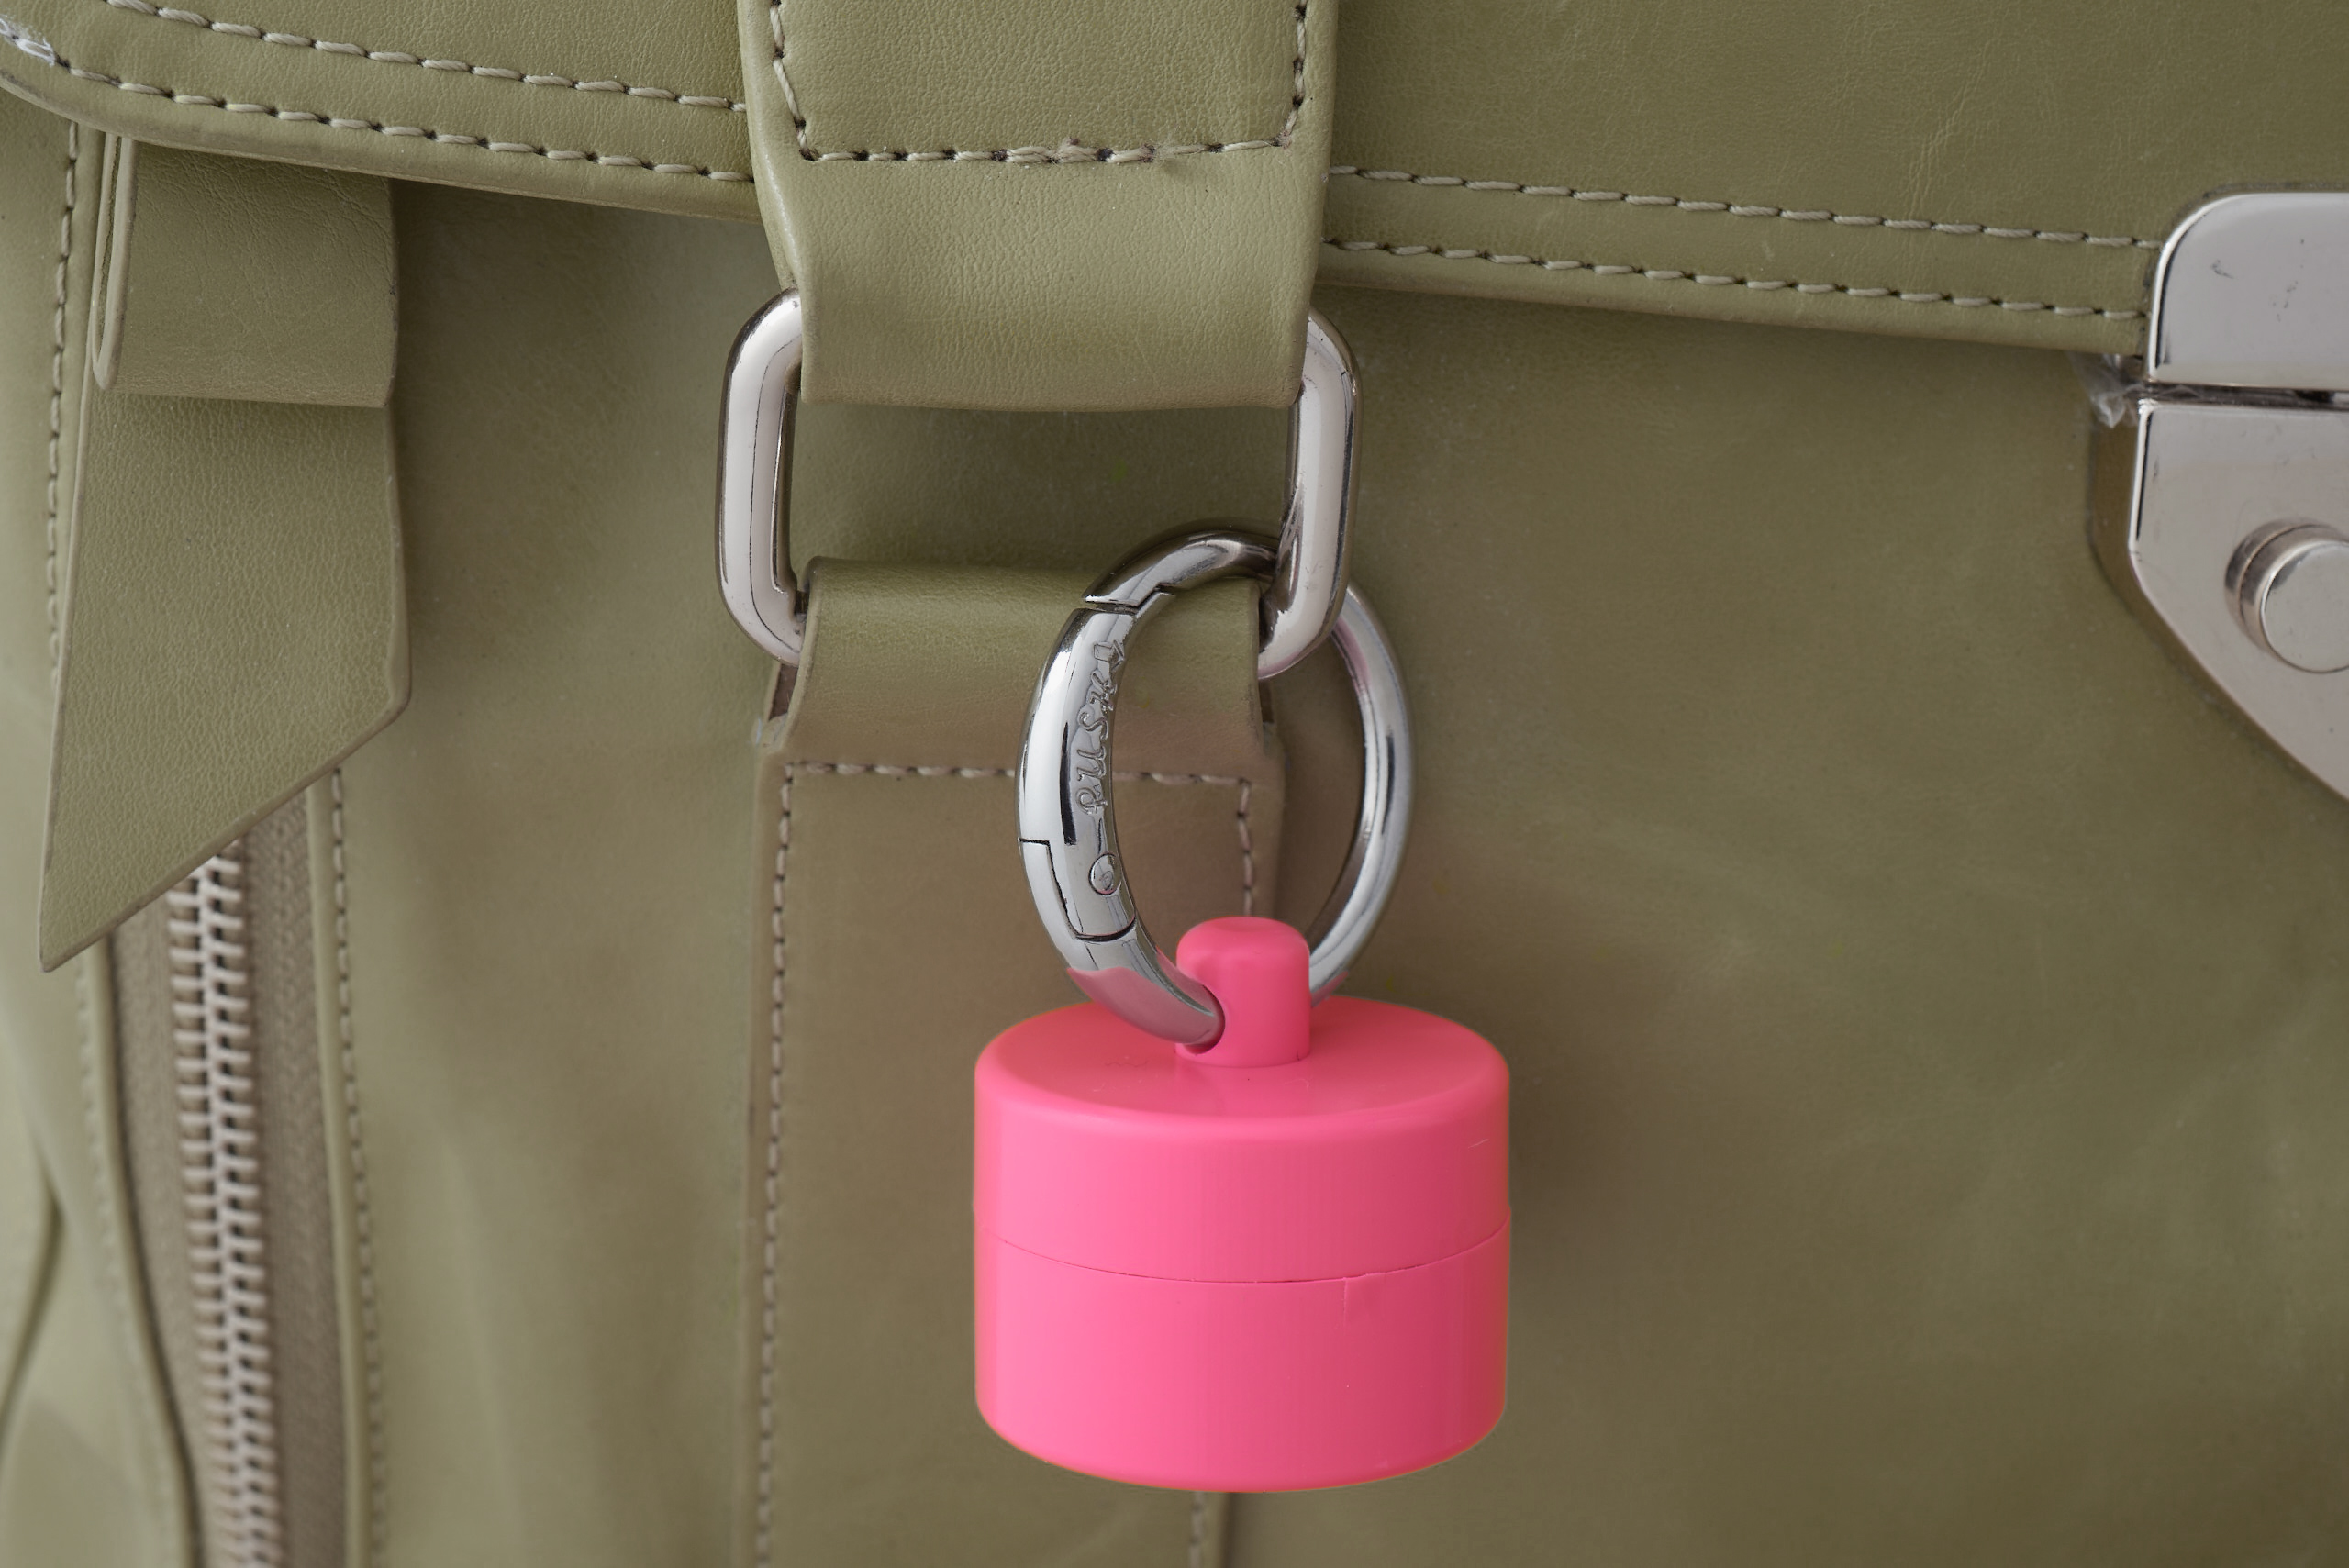 A pink Lion Latch keychain jewelry holder is seen clipped to a tan bag